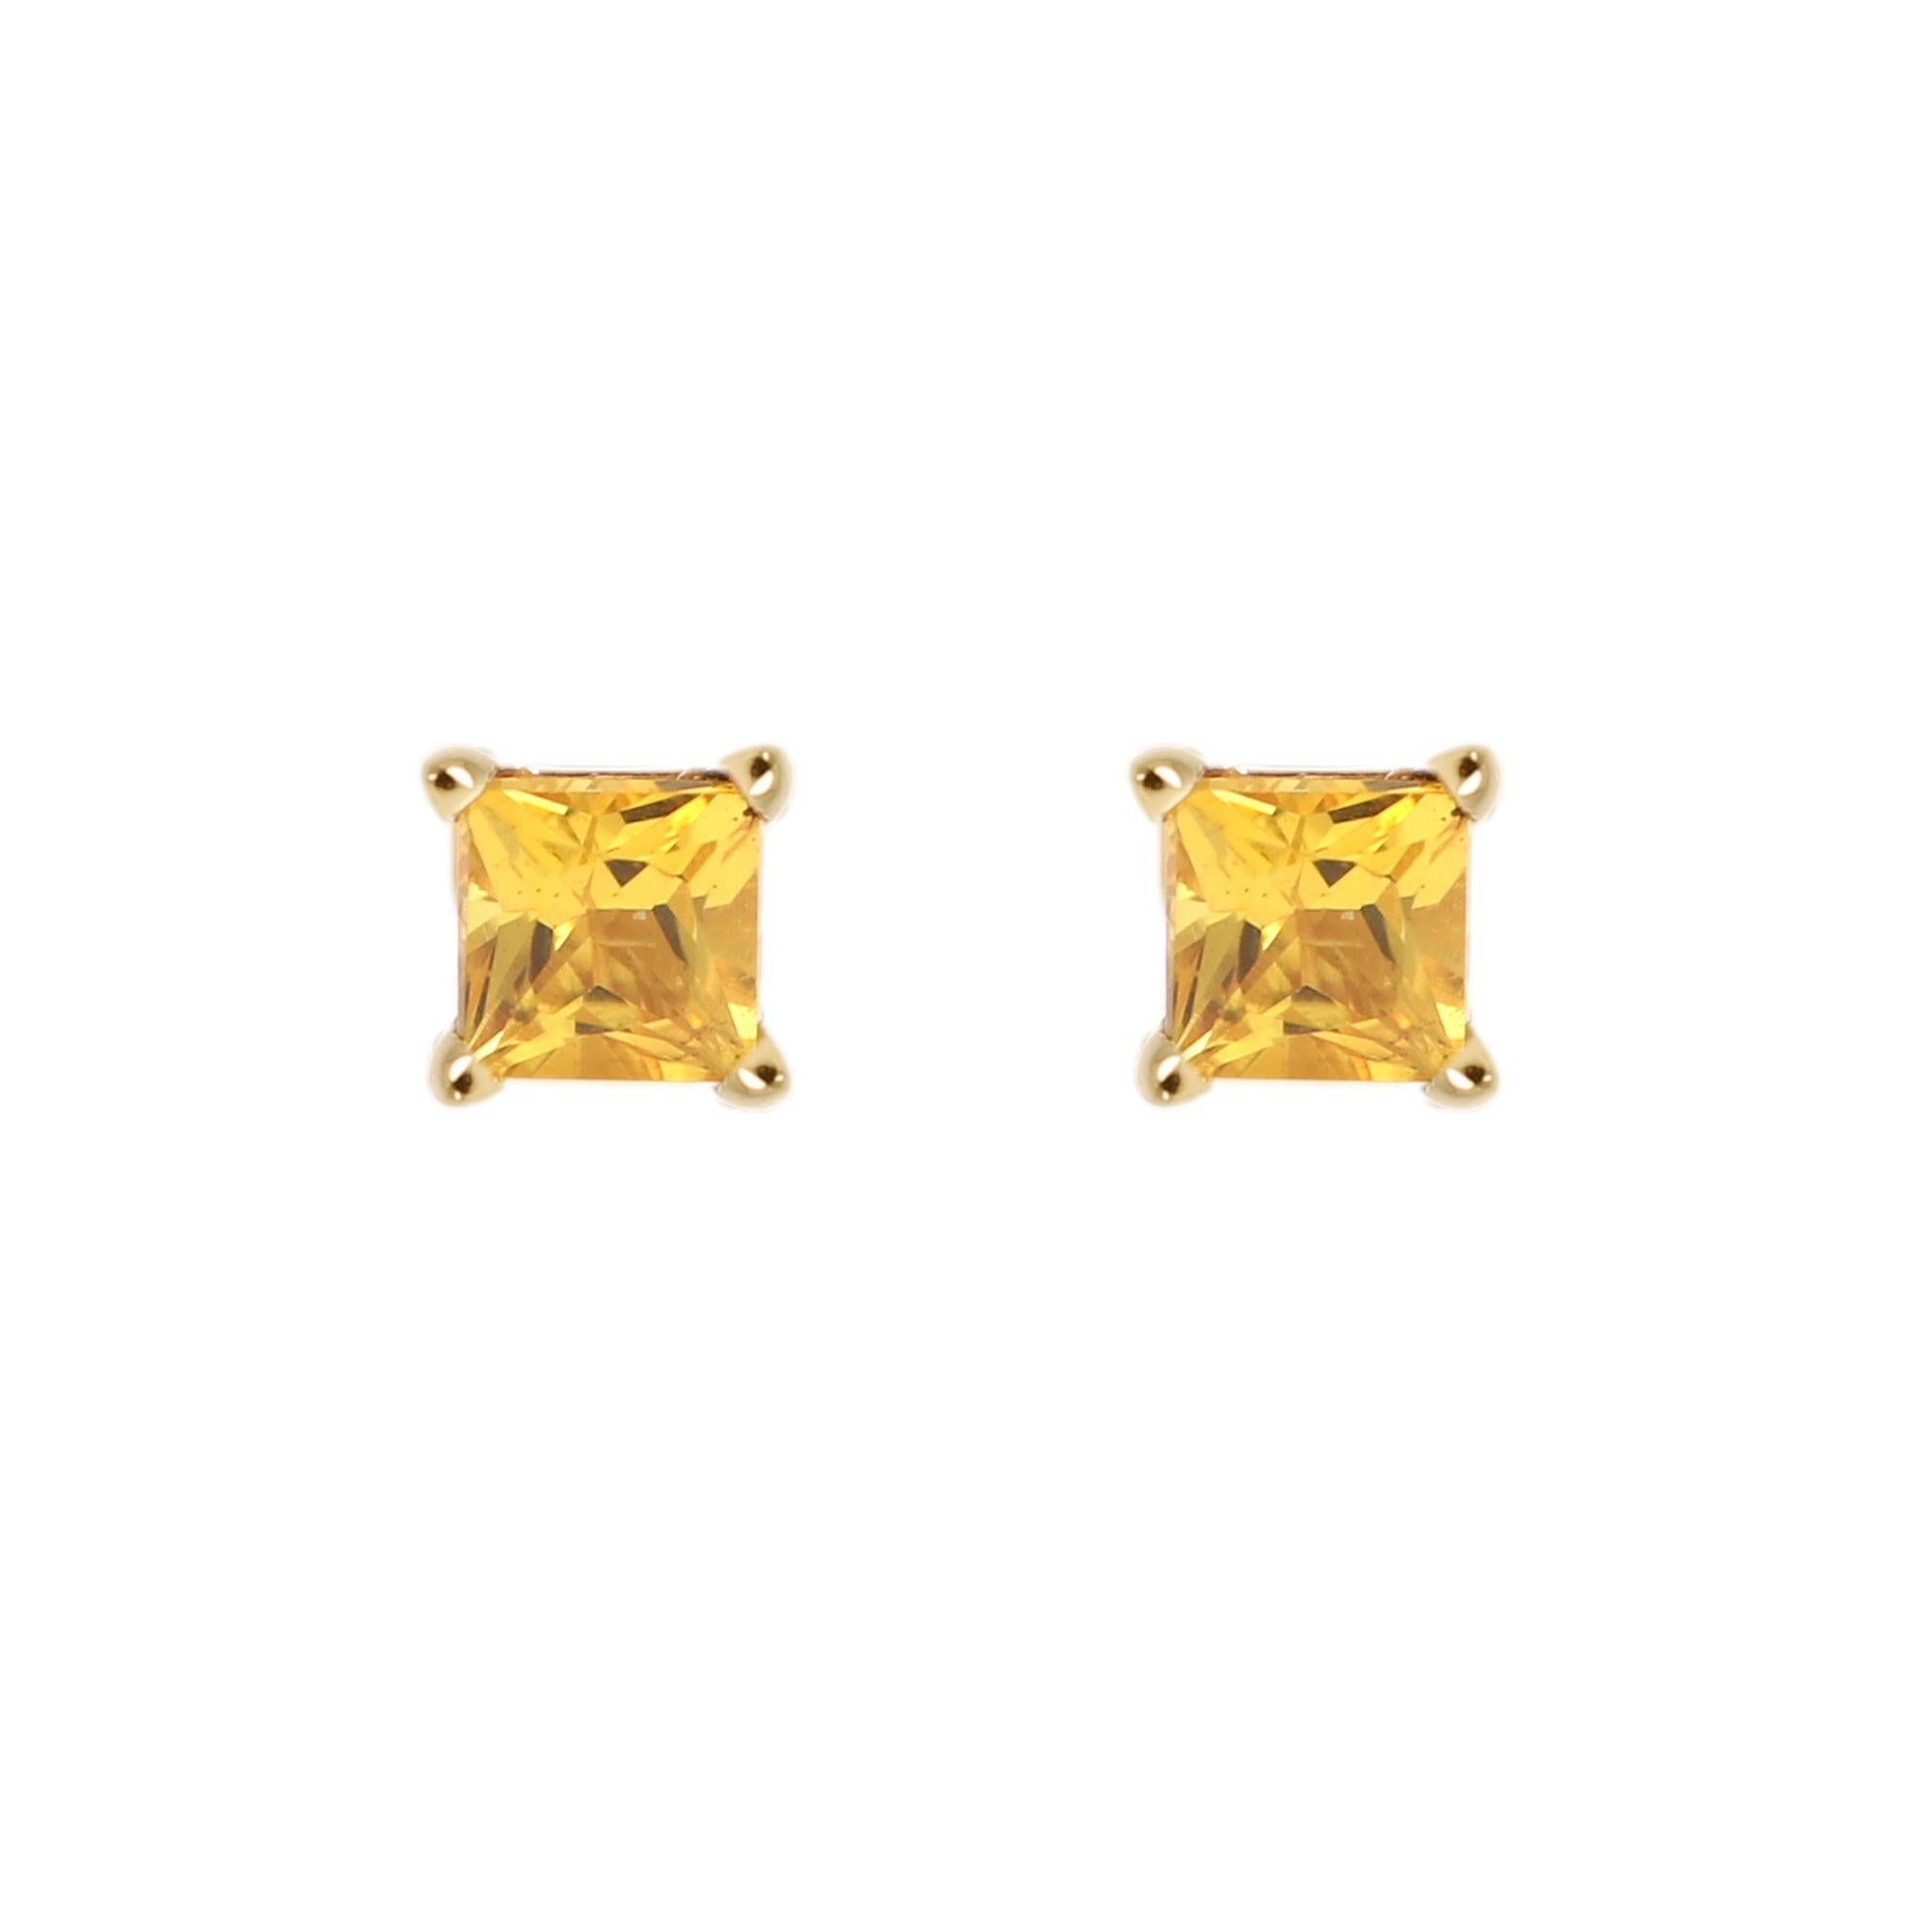 Solid 14k Yellow Gold 
Natural Yellow Sapphire Gemstone
1 pair ( 2pieces )
each stone is 3.0 mm approx 0.20 carat 
Square shape
AA Quality Gems
due to natural formations minor inclusions or imperfections may occur
Good for any age
+Gift Box
